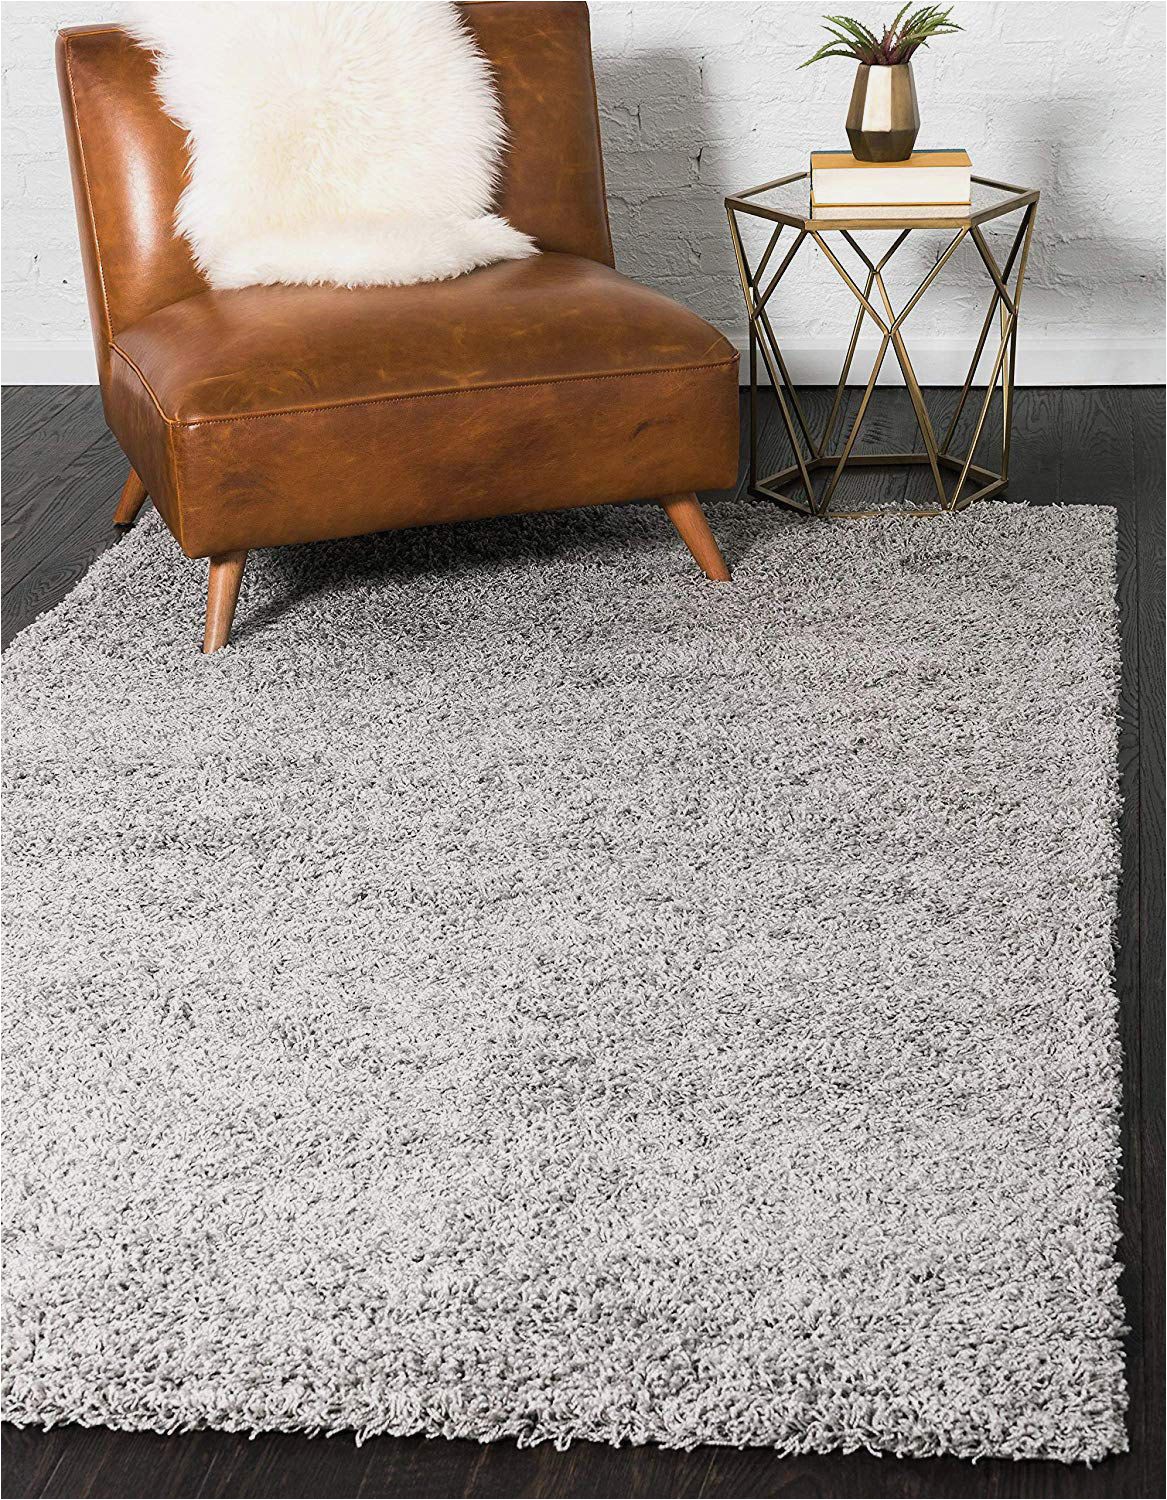 Huge area Rugs for Sale 11 Best area Rugs Under $200 2018 the Strategist